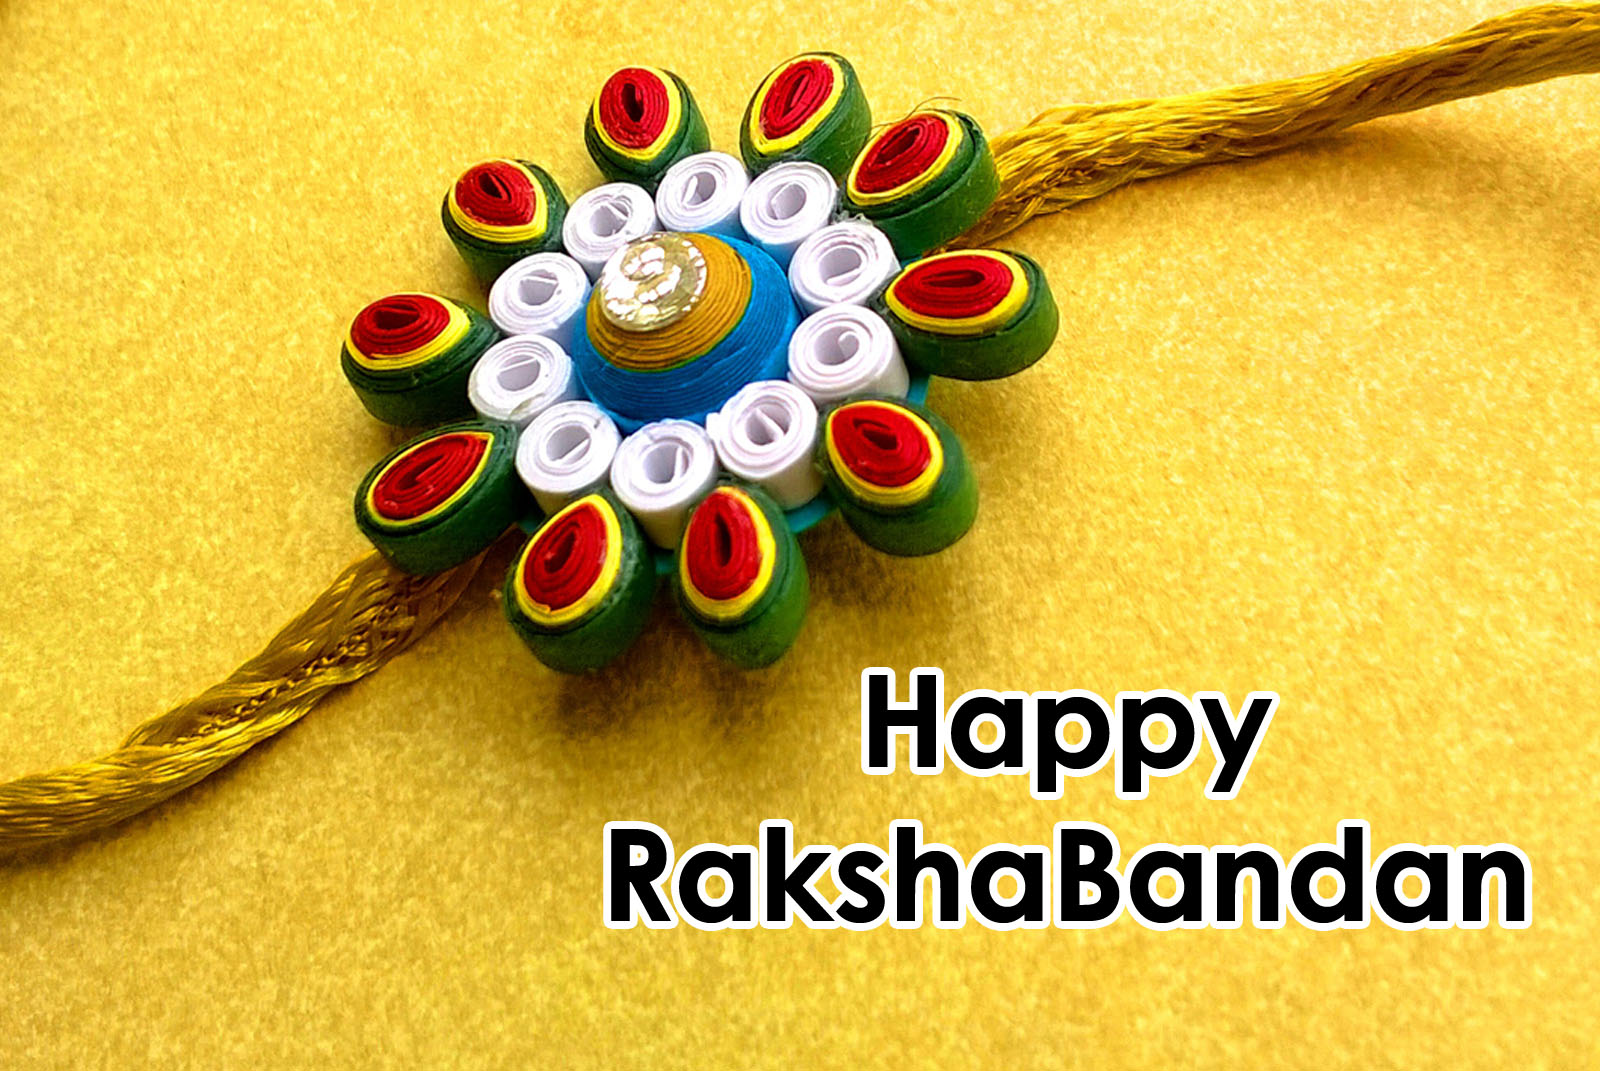 Incredible Collection of Over 999 Rakhi Images for Brothers in Stunning 4K Quality